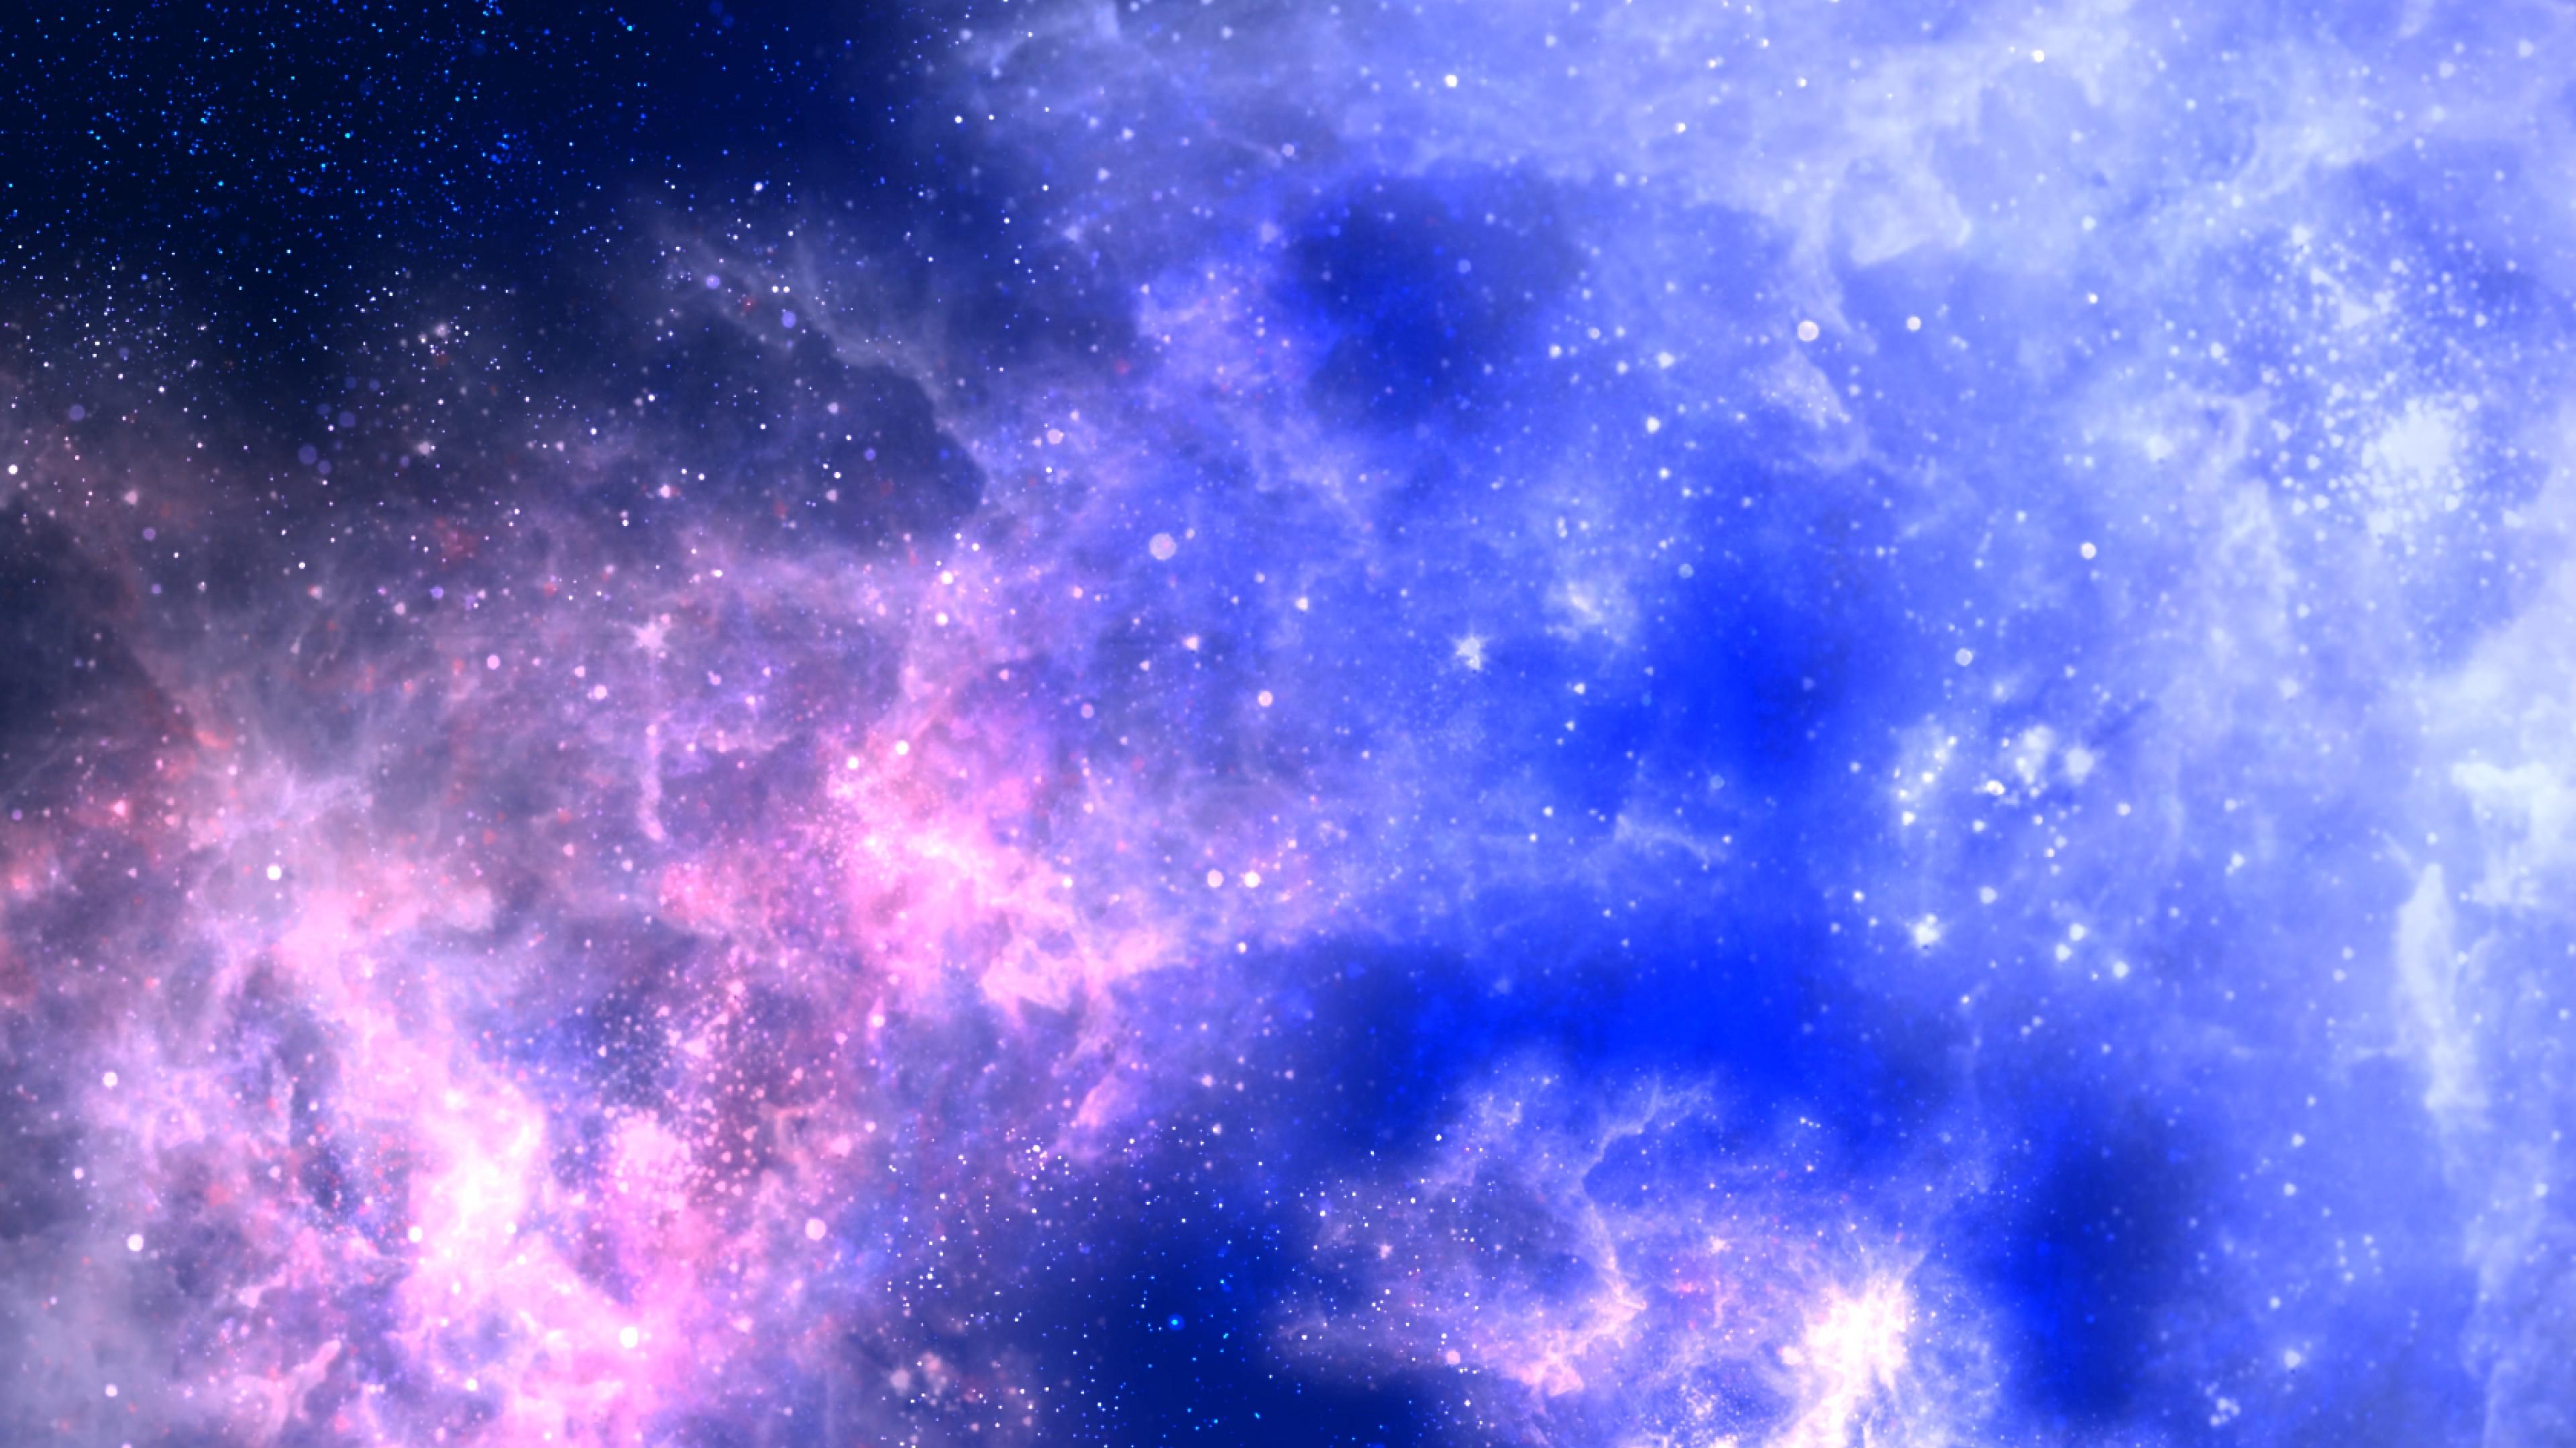 Galaxy Wallpaper 4k Image For Your